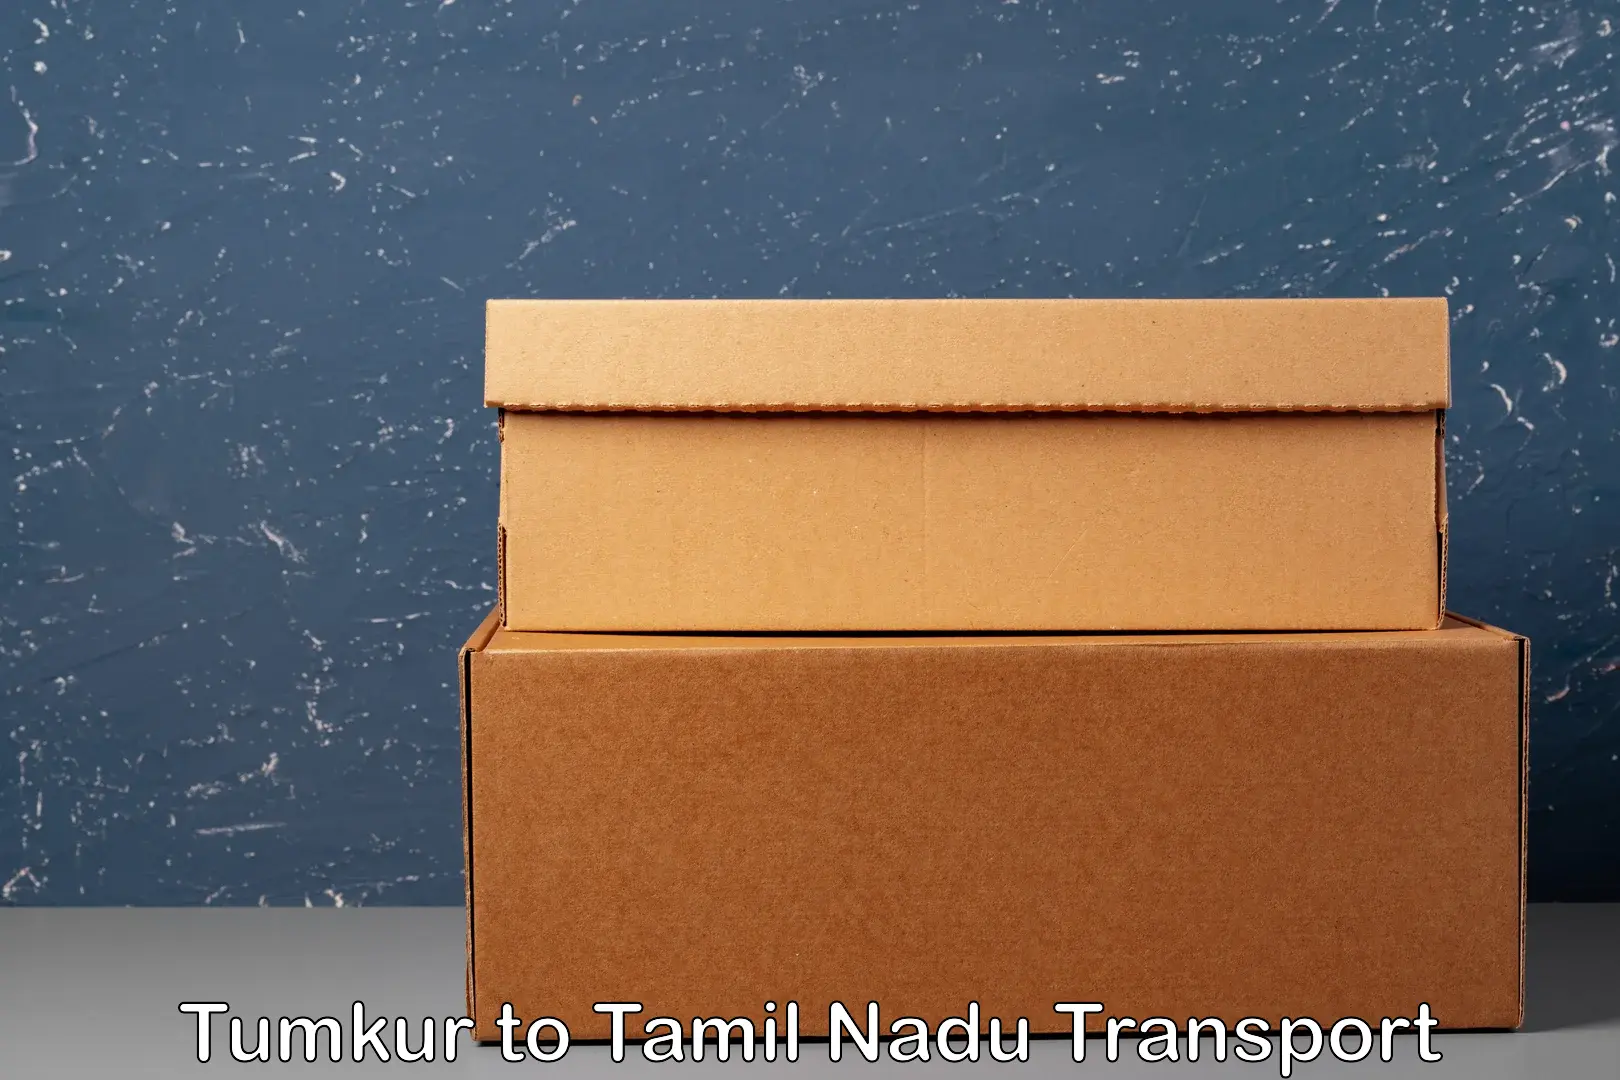 Container transport service in Tumkur to Mettupalayam